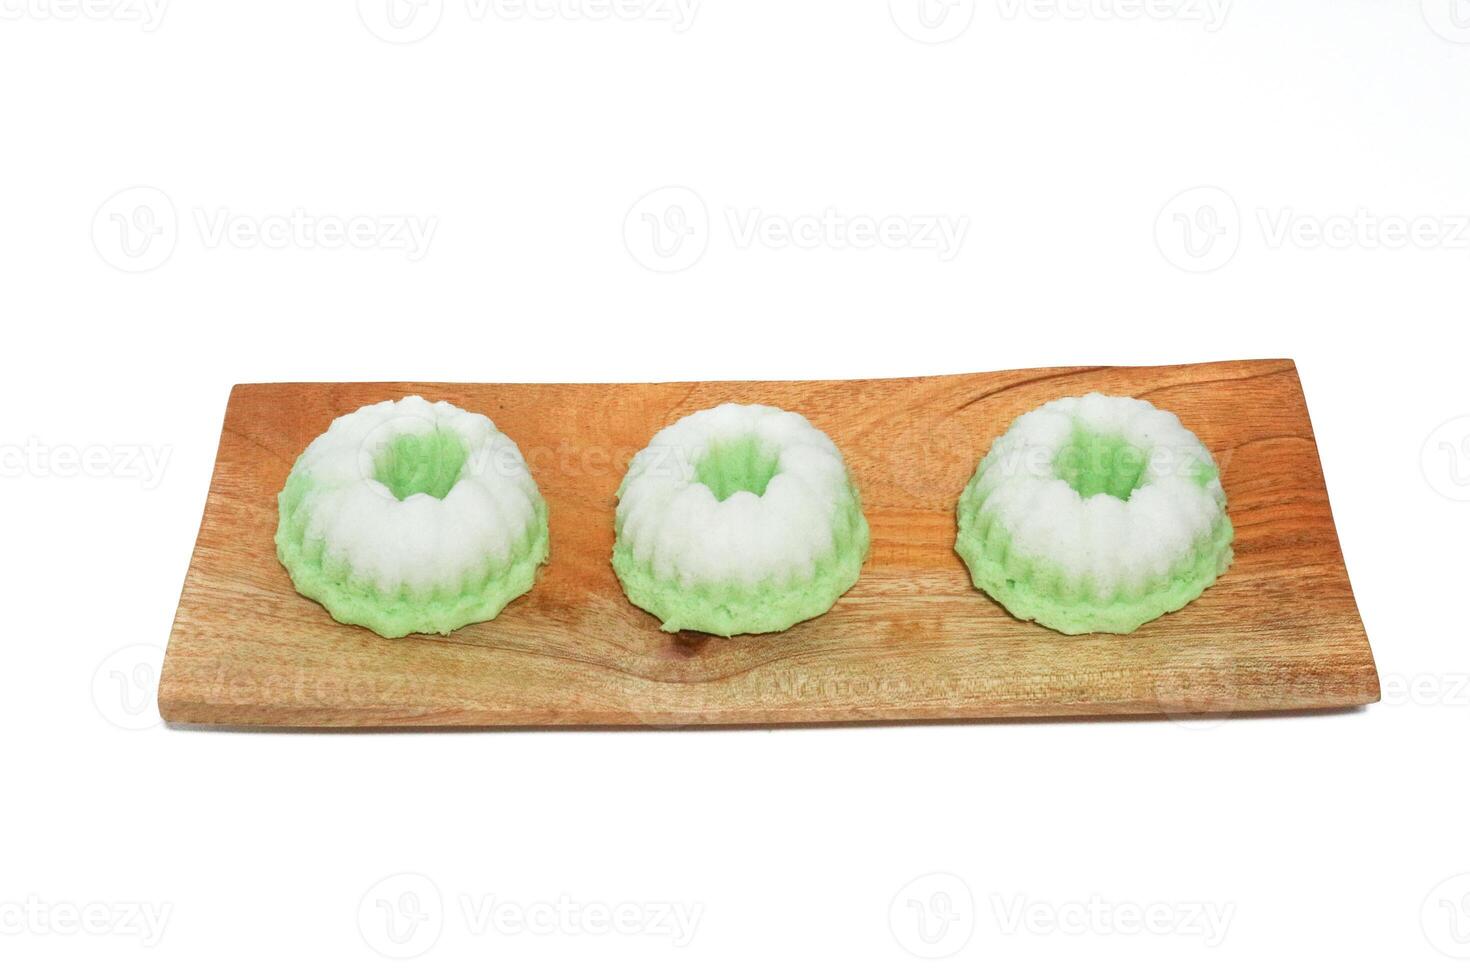 Green putu ayu is an Indonesian local cake made from rice flour and coconut milk with glaze of coconut photo